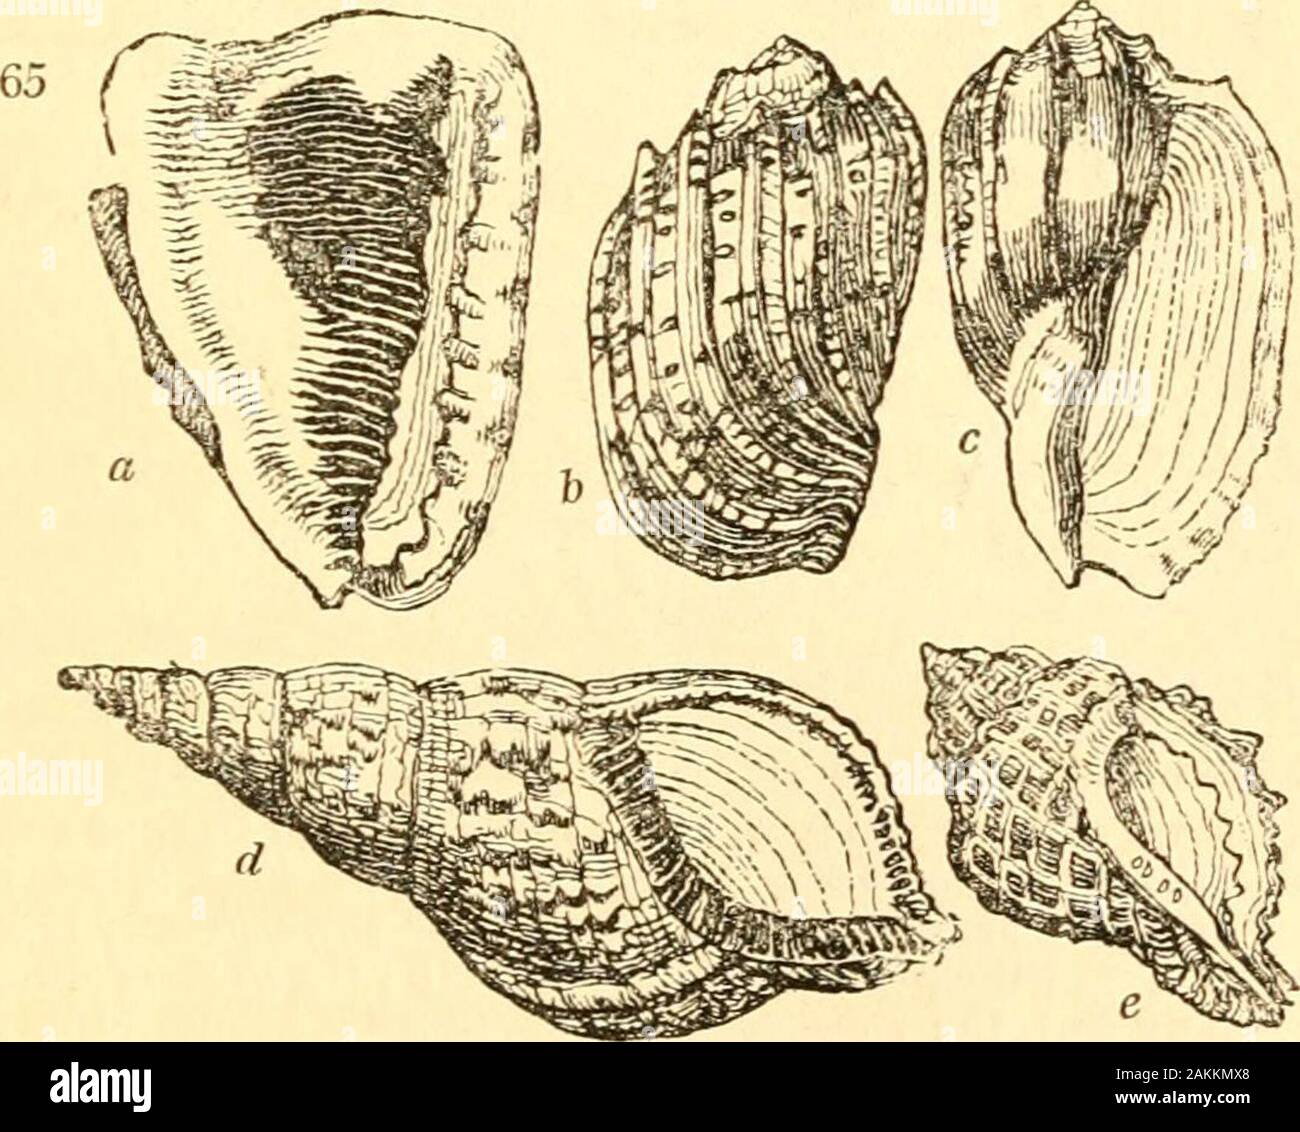 A treatise on malacology; or, Shells and shell fish . marginata.caudisata. Sow. Gen. f. 2.lb. f. 1. spinosa. En. M. 421. 5-crumena. lb. 421.3. SuB-FAM. 2. CASSINtE.SheU large, ventricose, generally smooth ; spire very. * This is the only character by which this group, as a genus, can be dis-tinguished; and this is exceptionable, because there are some species, likeT.clandestinuni {fig. Q^-), which have the outer lip thickened, and are with- 298 SHELLS AND SHELL-FISH. PART II. short; the base truncate and emarginate, or with ashort recurved channel; inner lip toothed or plaited.* Harpa Lam. Var Stock Photo